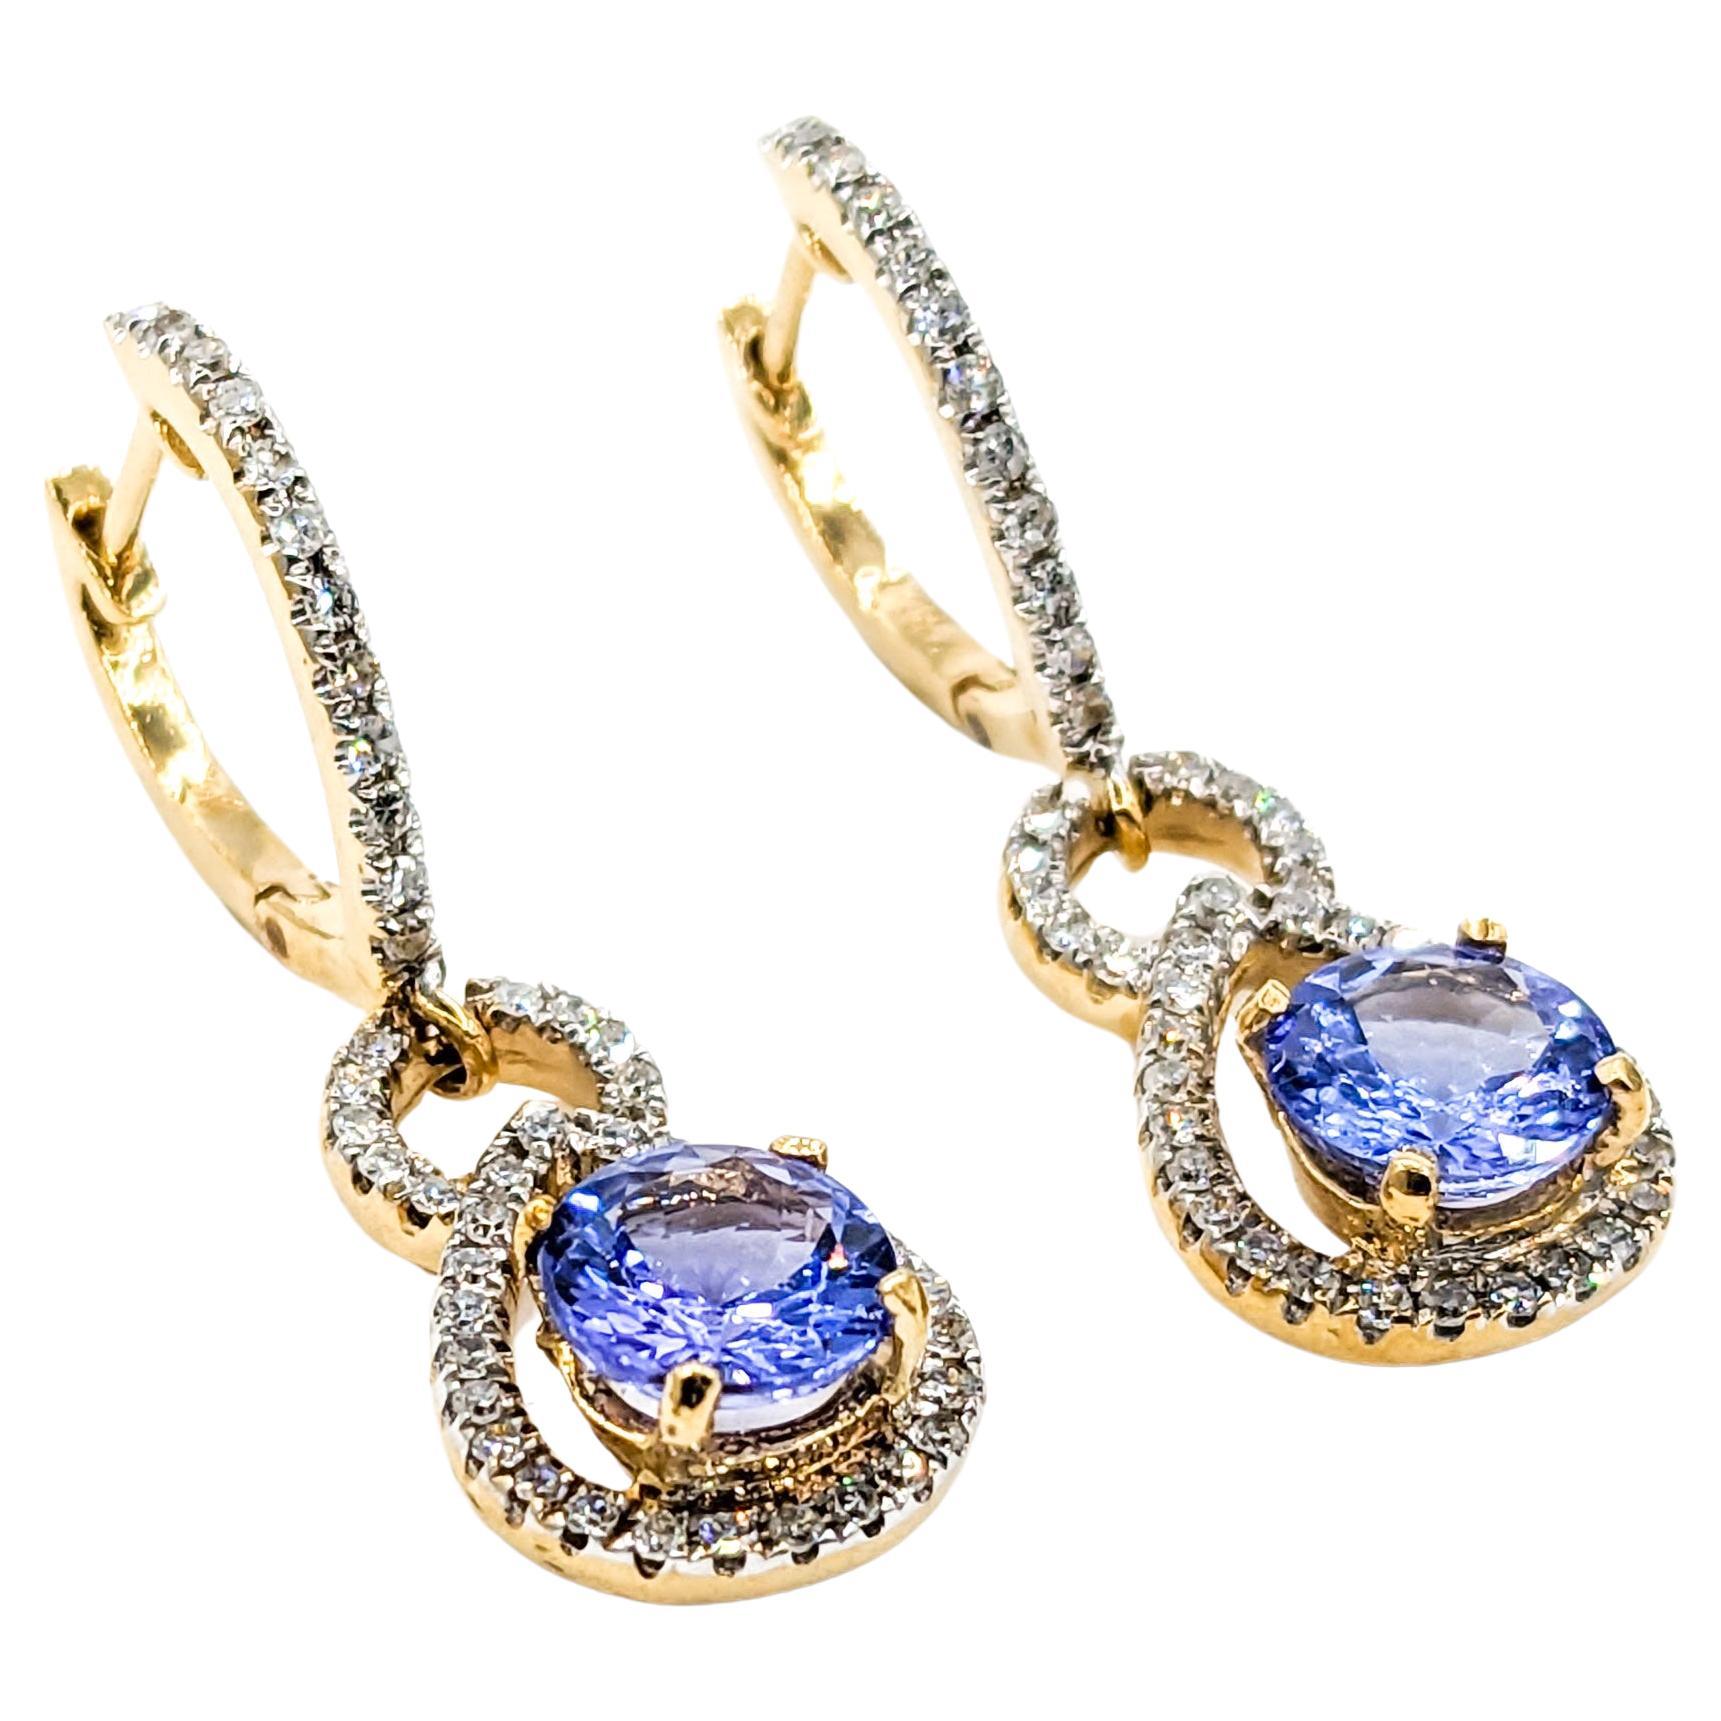 1.75ctw Tanzanite & Diamond Dangle Earrings In Yellow Gold

Introducing a stunning pair of Dangle Earrings crafted in 14kt Yellow Gold, adorned with a .50ctw of Round Diamonds. The Sparkly Diamonds exhibit I clarity and a Near Colorless white